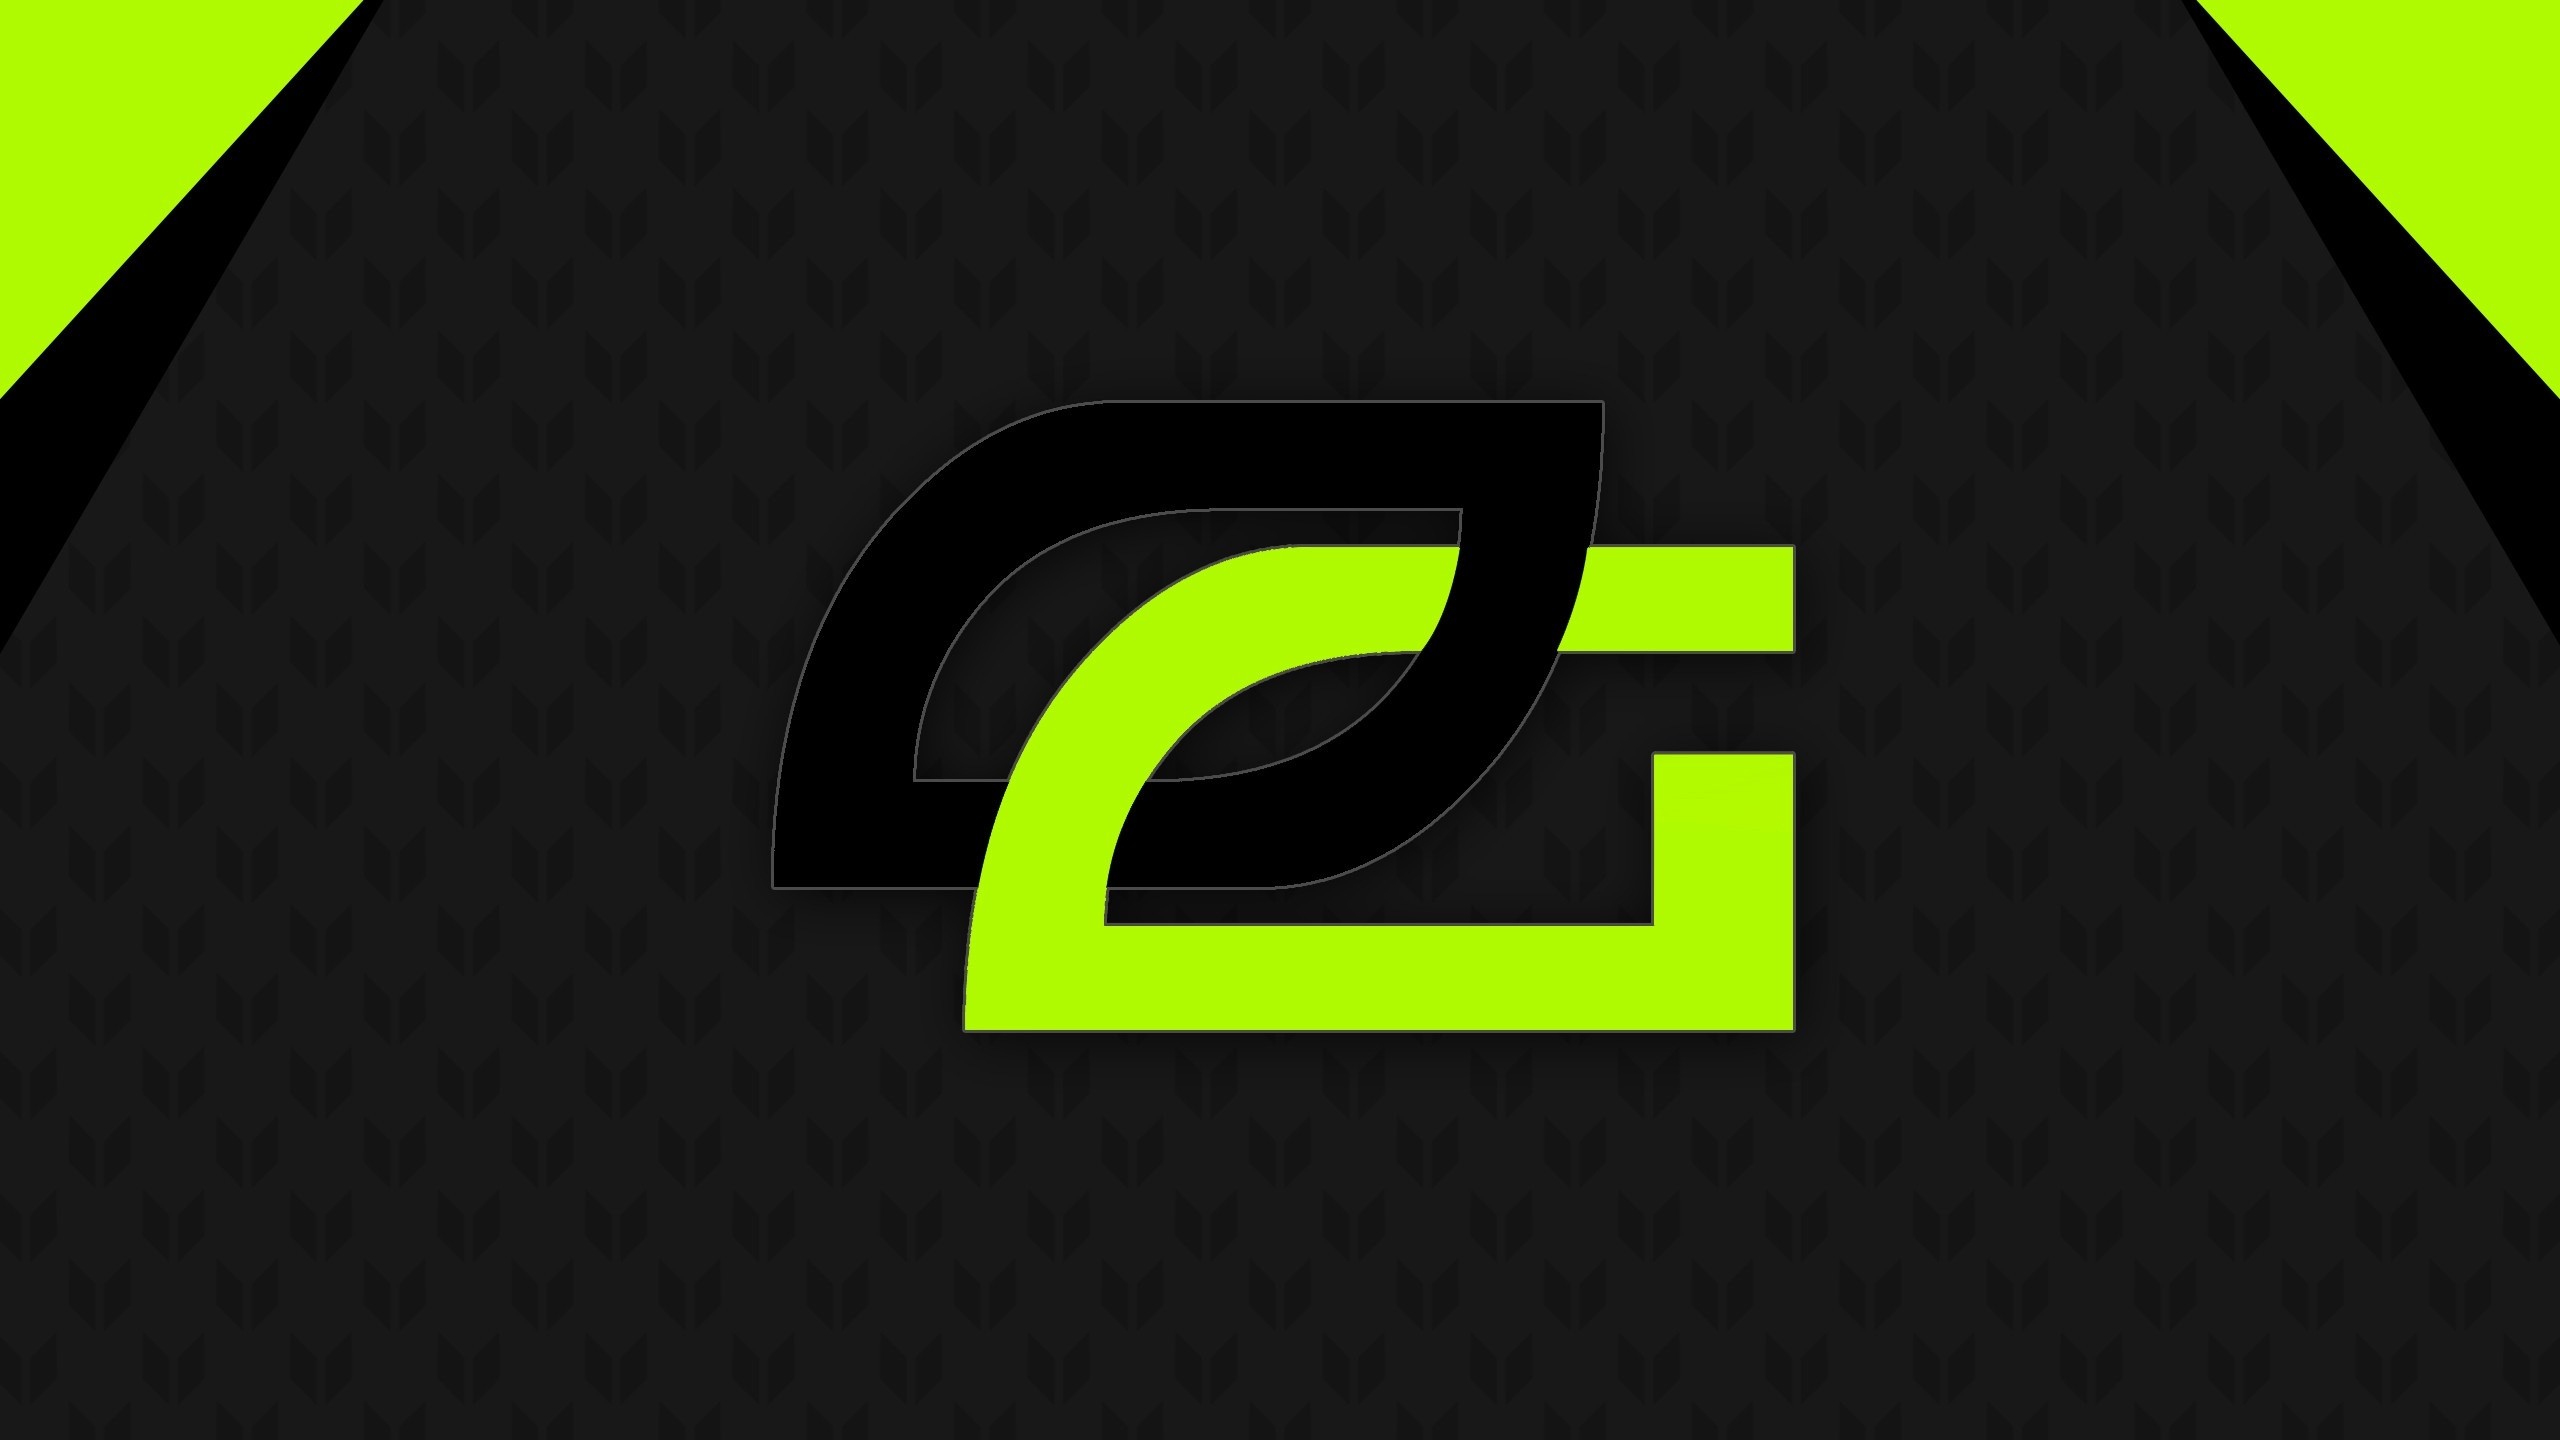 77 Optic Gaming Wallpapers on WallpaperPlay  Gaming wallpapers Optic  gaming Gaming wallpapers hd